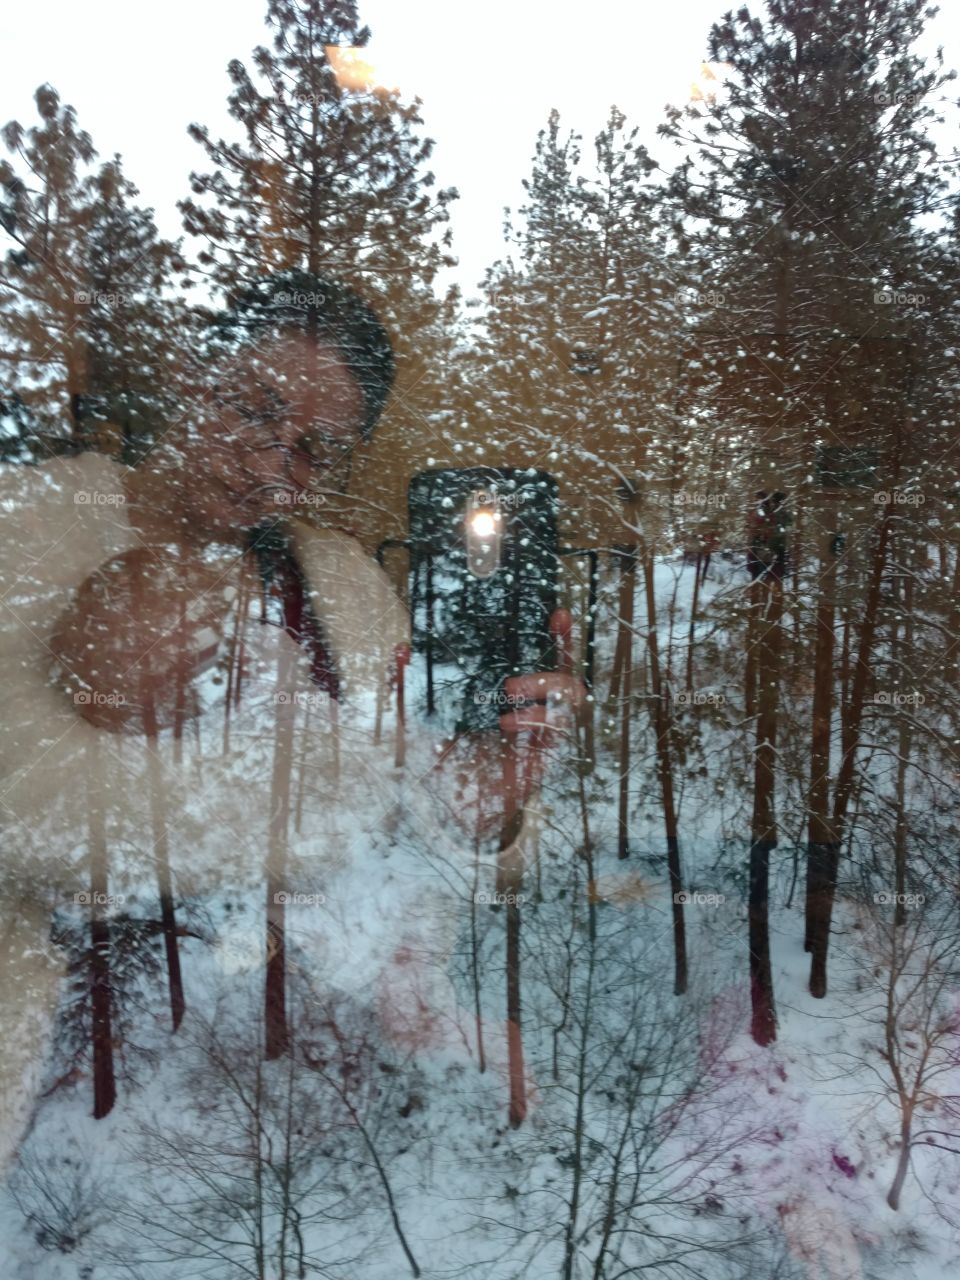 Trees reflected on glass